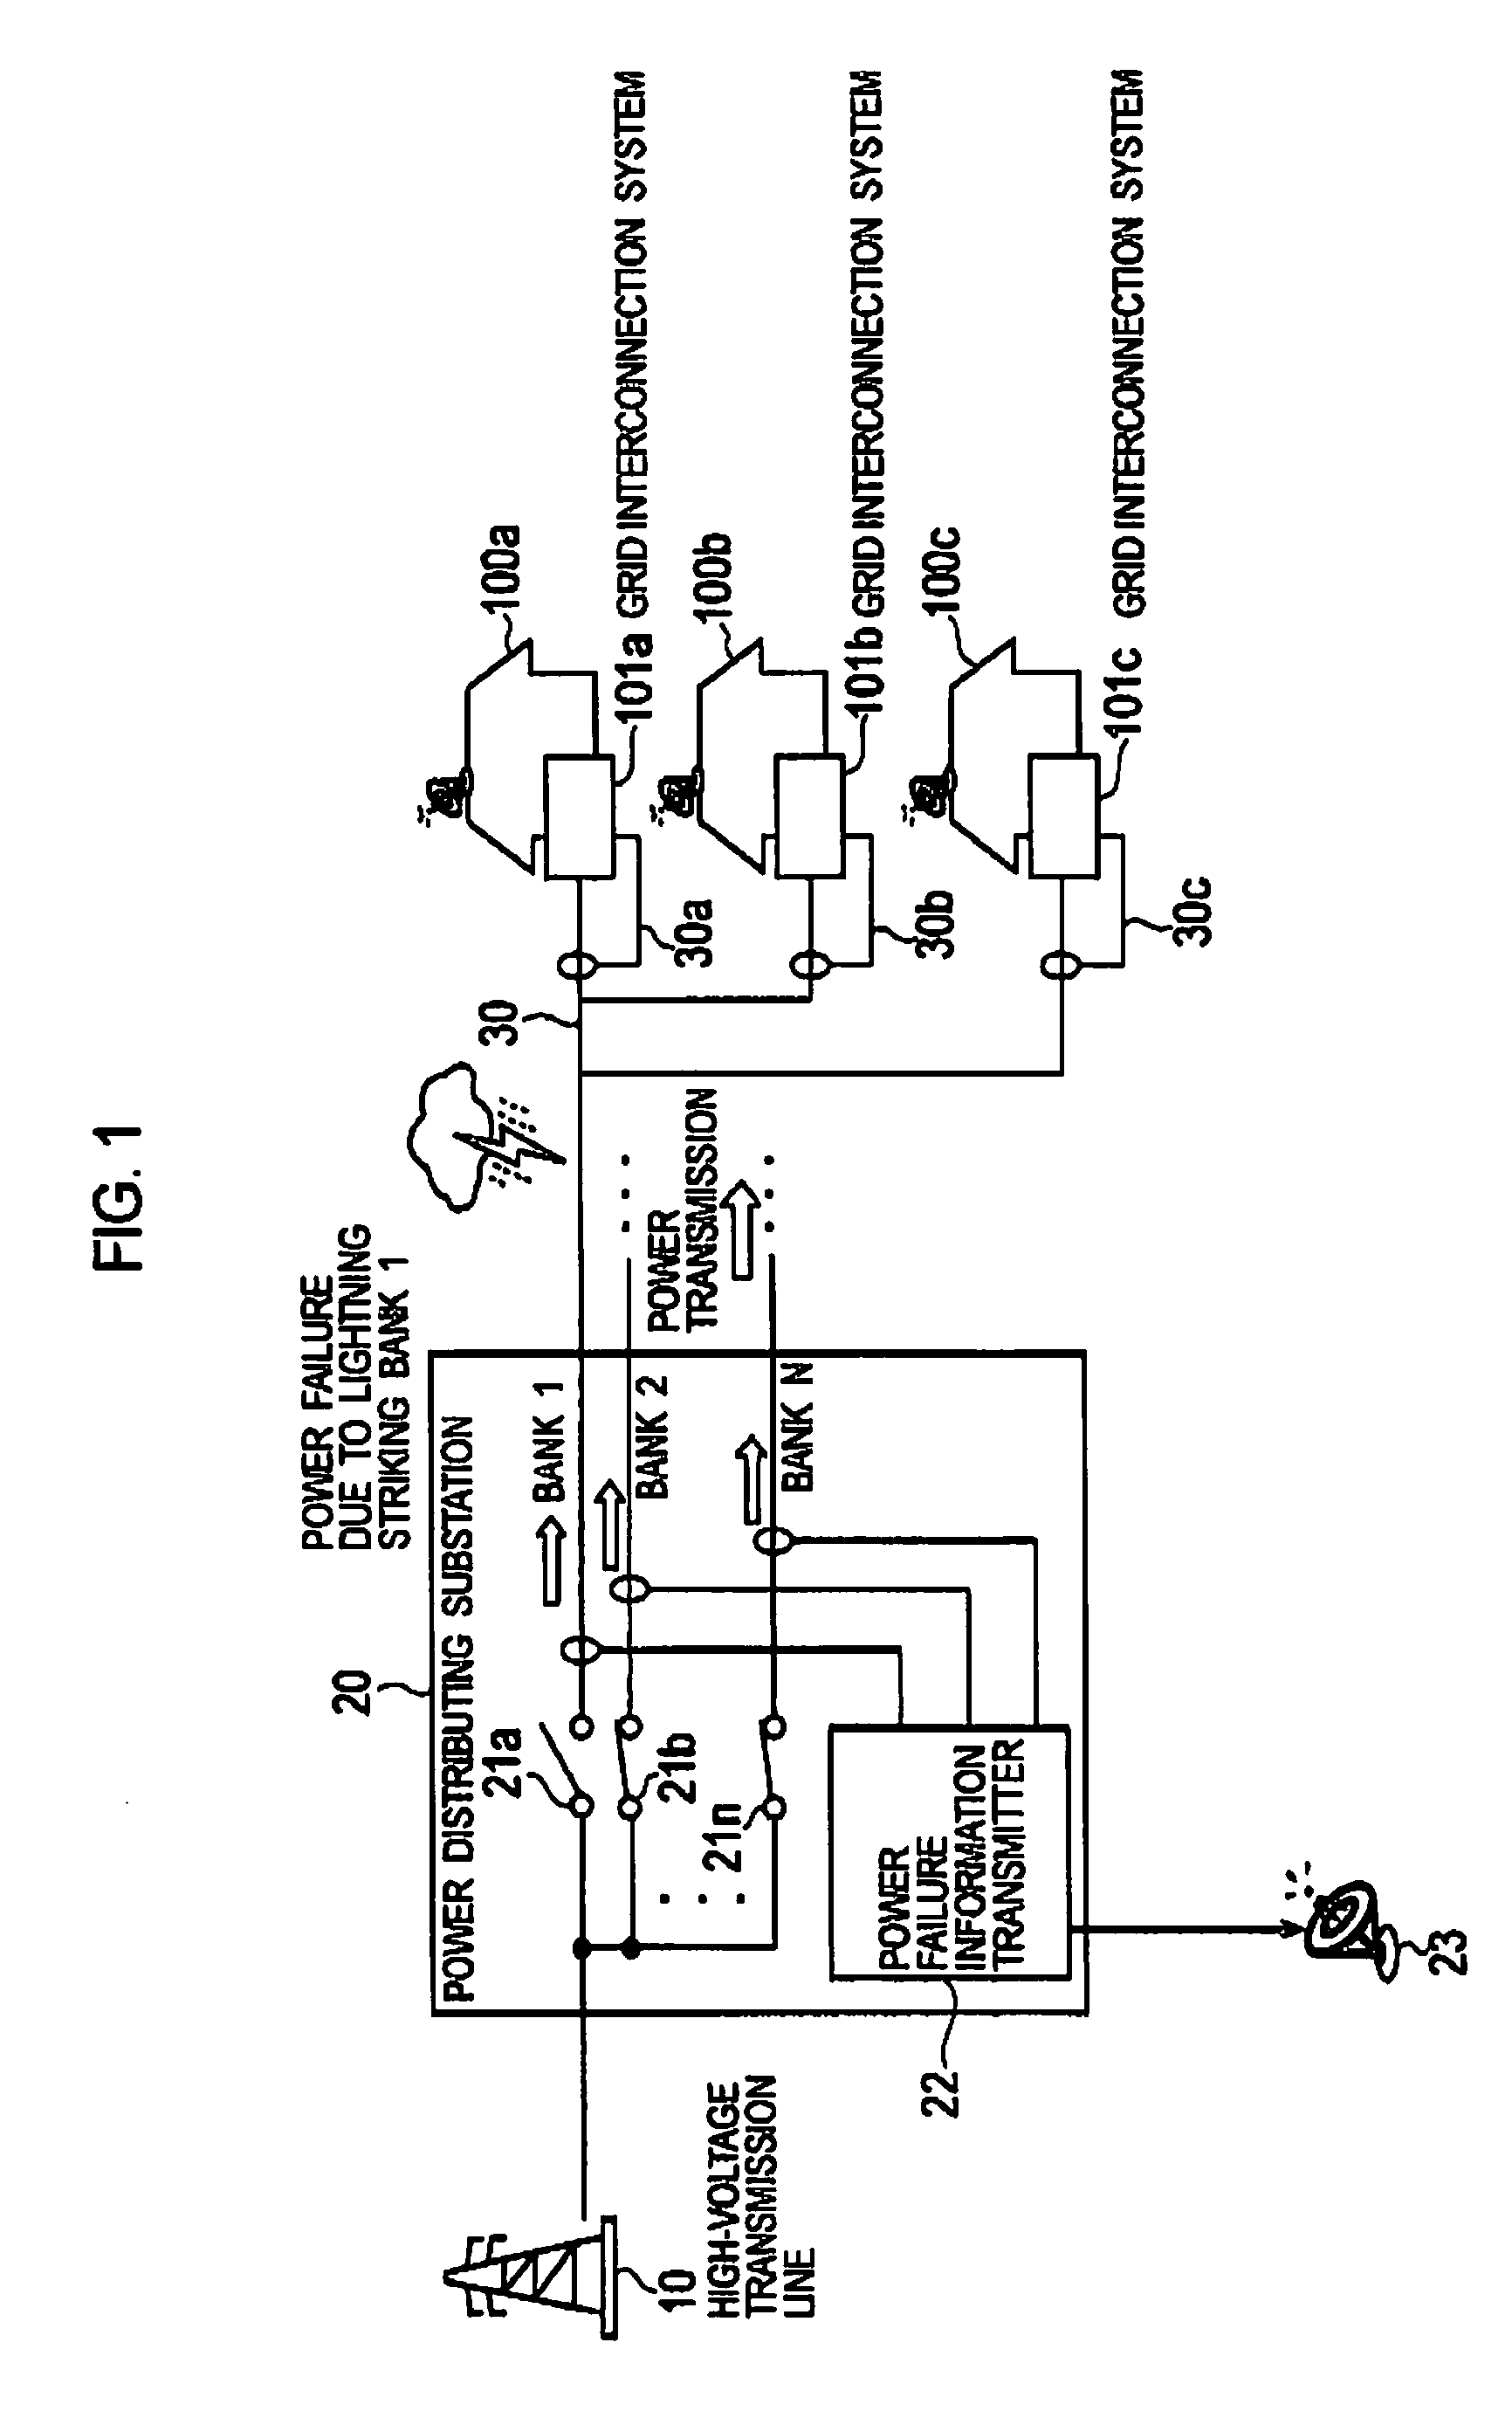 Grid interconnection device, grid interconnection system and transfer trip system